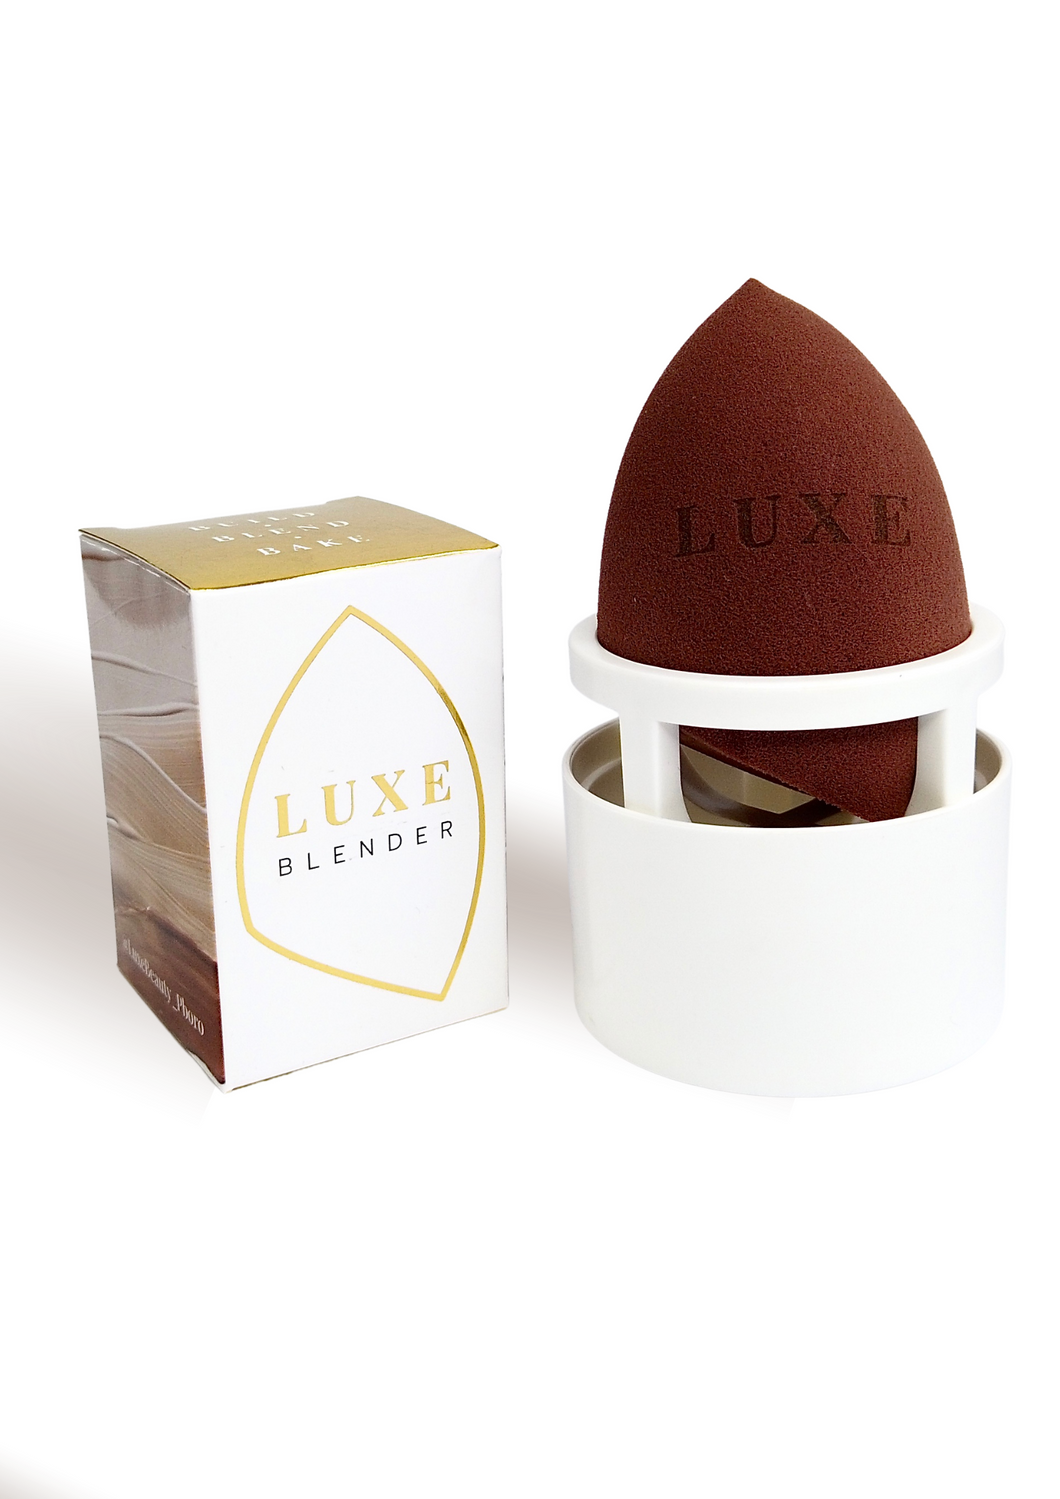 Luxe Blender makeup sponge with holder, and drying stand, perfect to keep your sponge clean and safe. This long lasting and hygienic makeup sponge is used and approved by professional makeup artists across the UK.